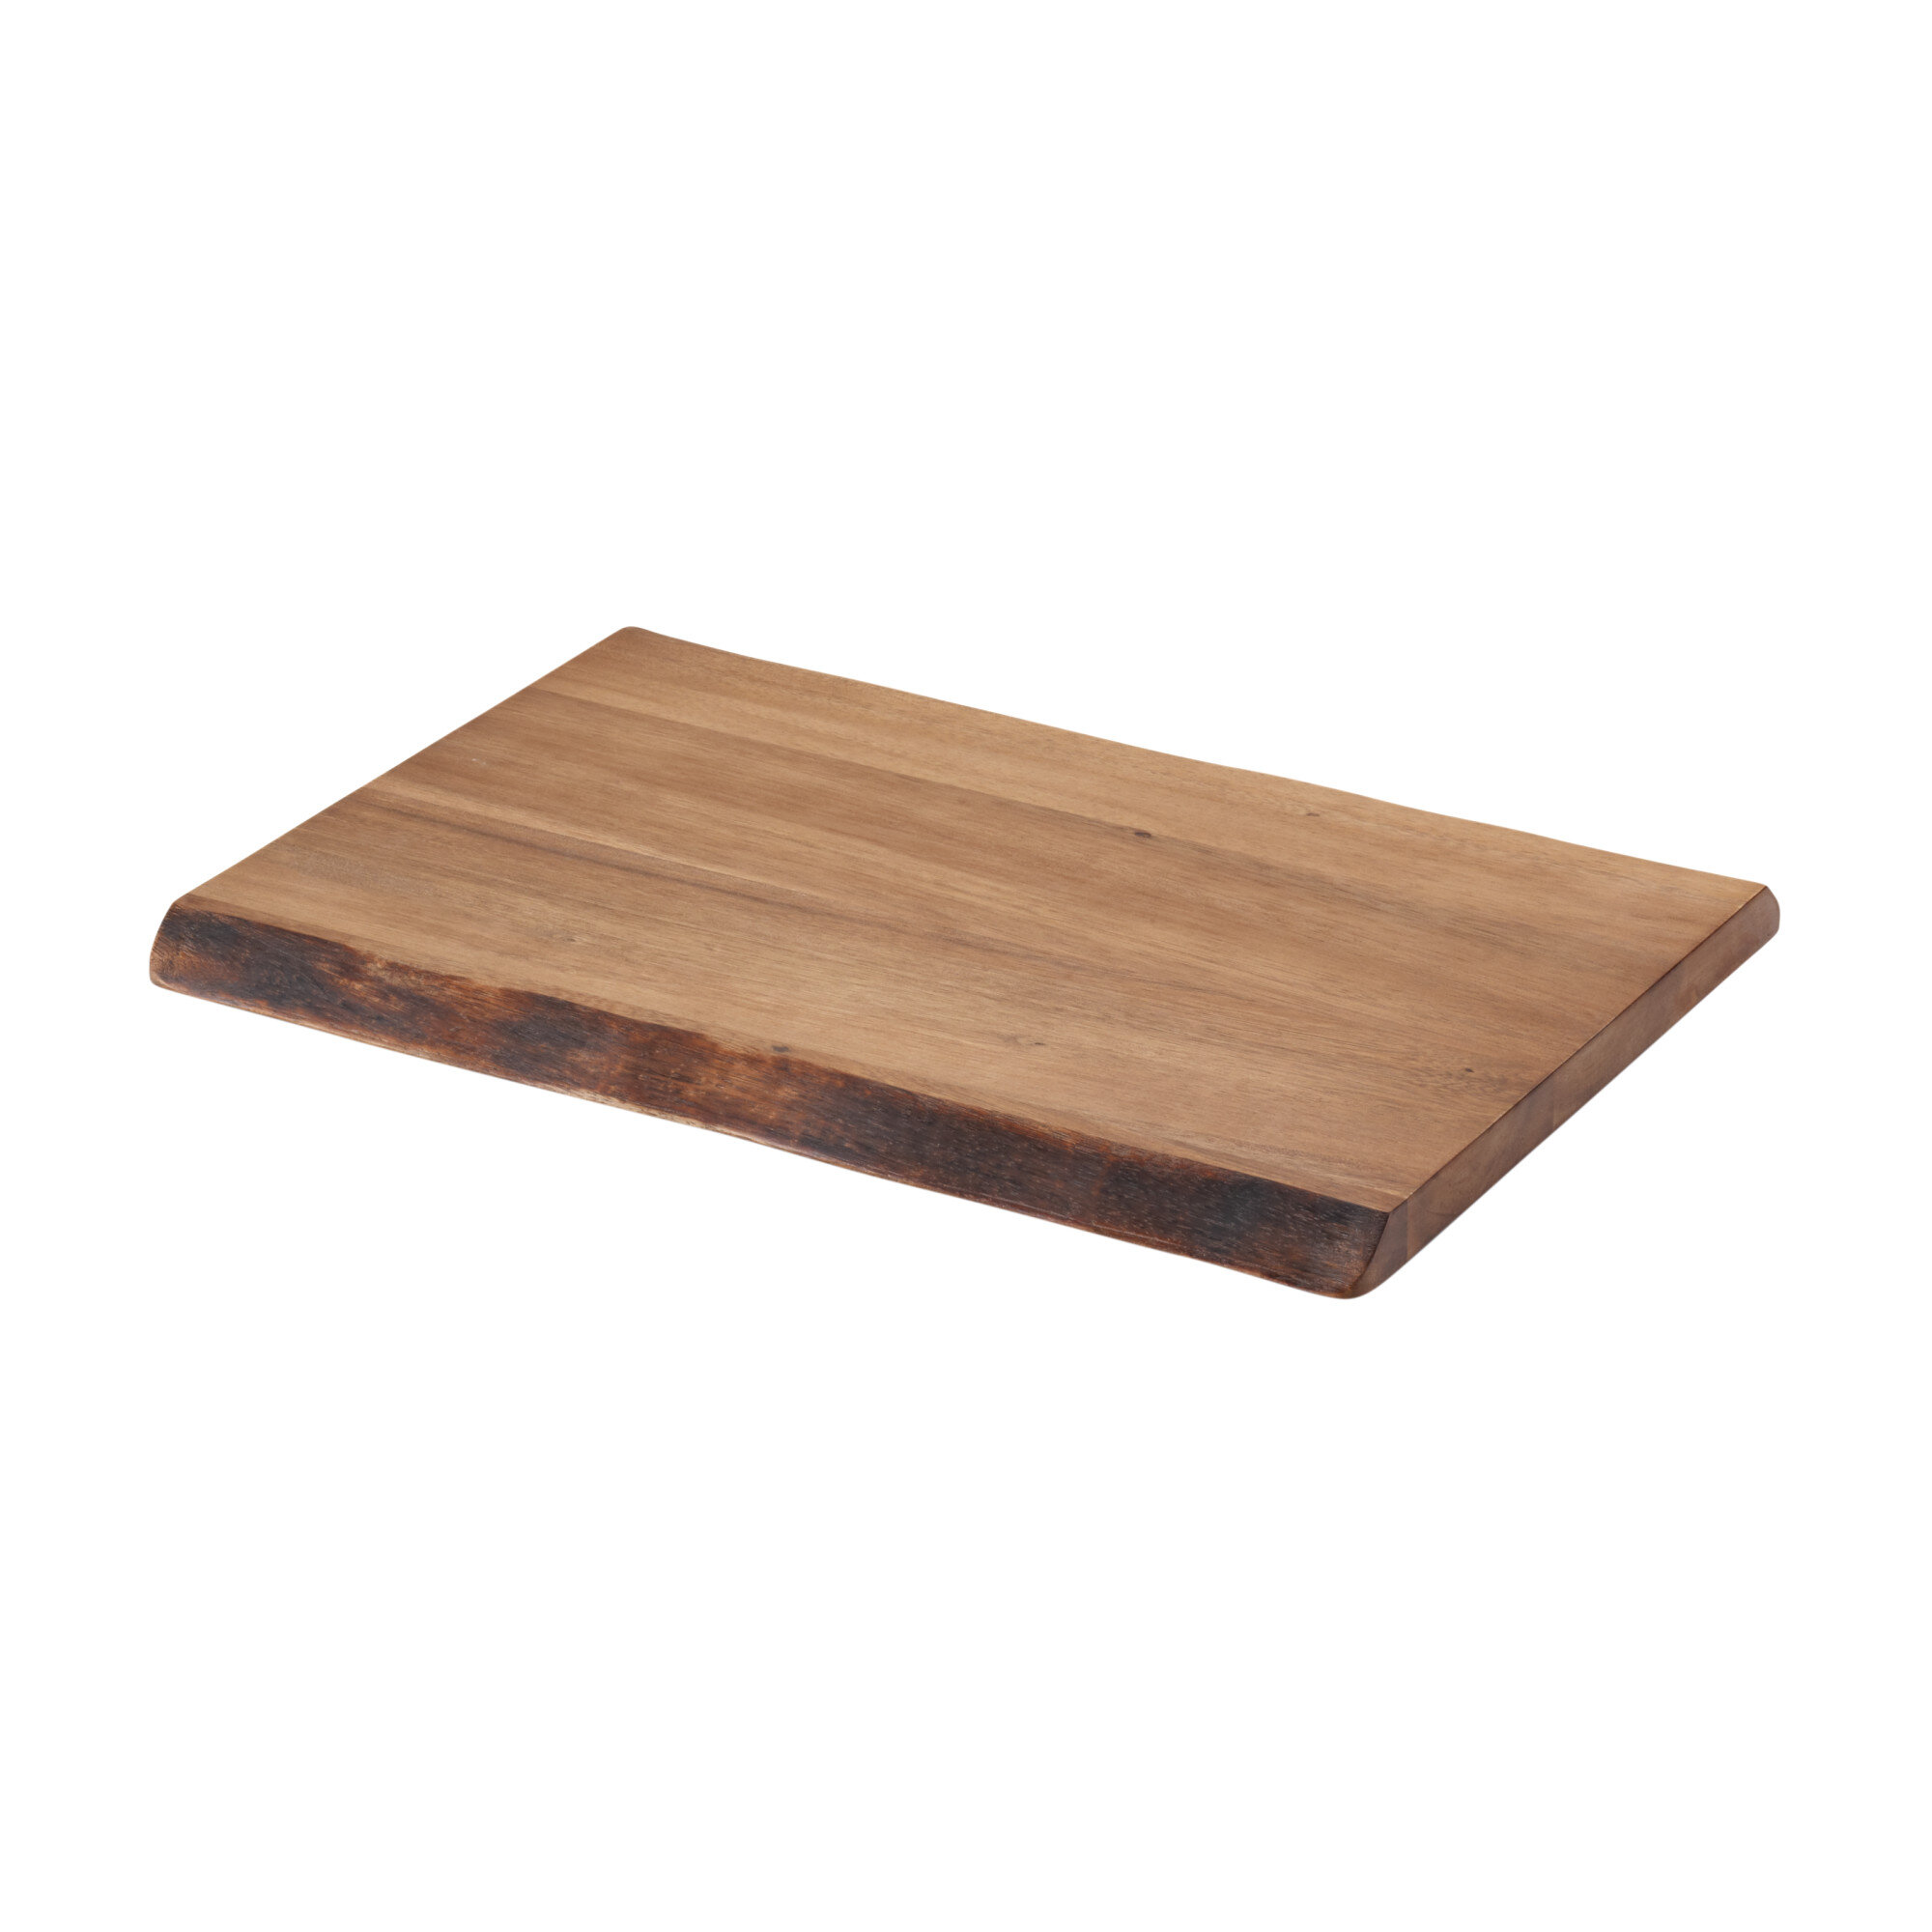 Multi Wood Cutting Board 13 By 9 Inches Made In The USA. 